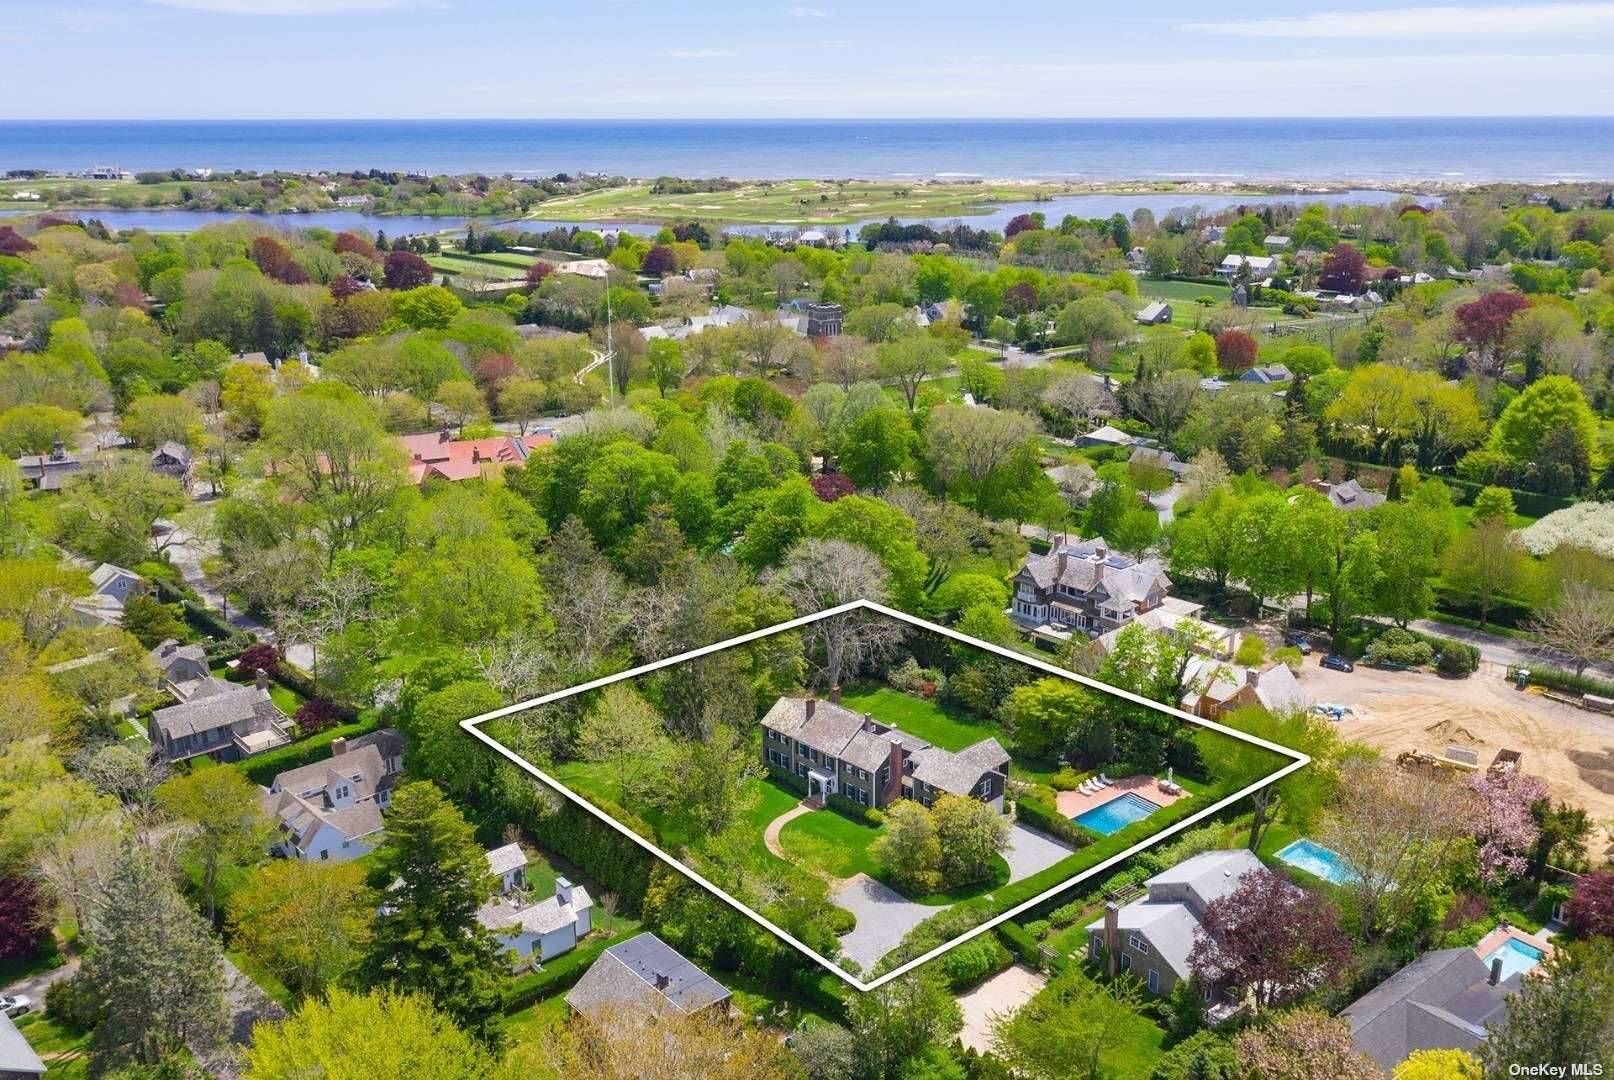 Located on a private road in the Village of East Hampton, this magnificent traditional residence originally built in the 1840's was renovated in 2018.